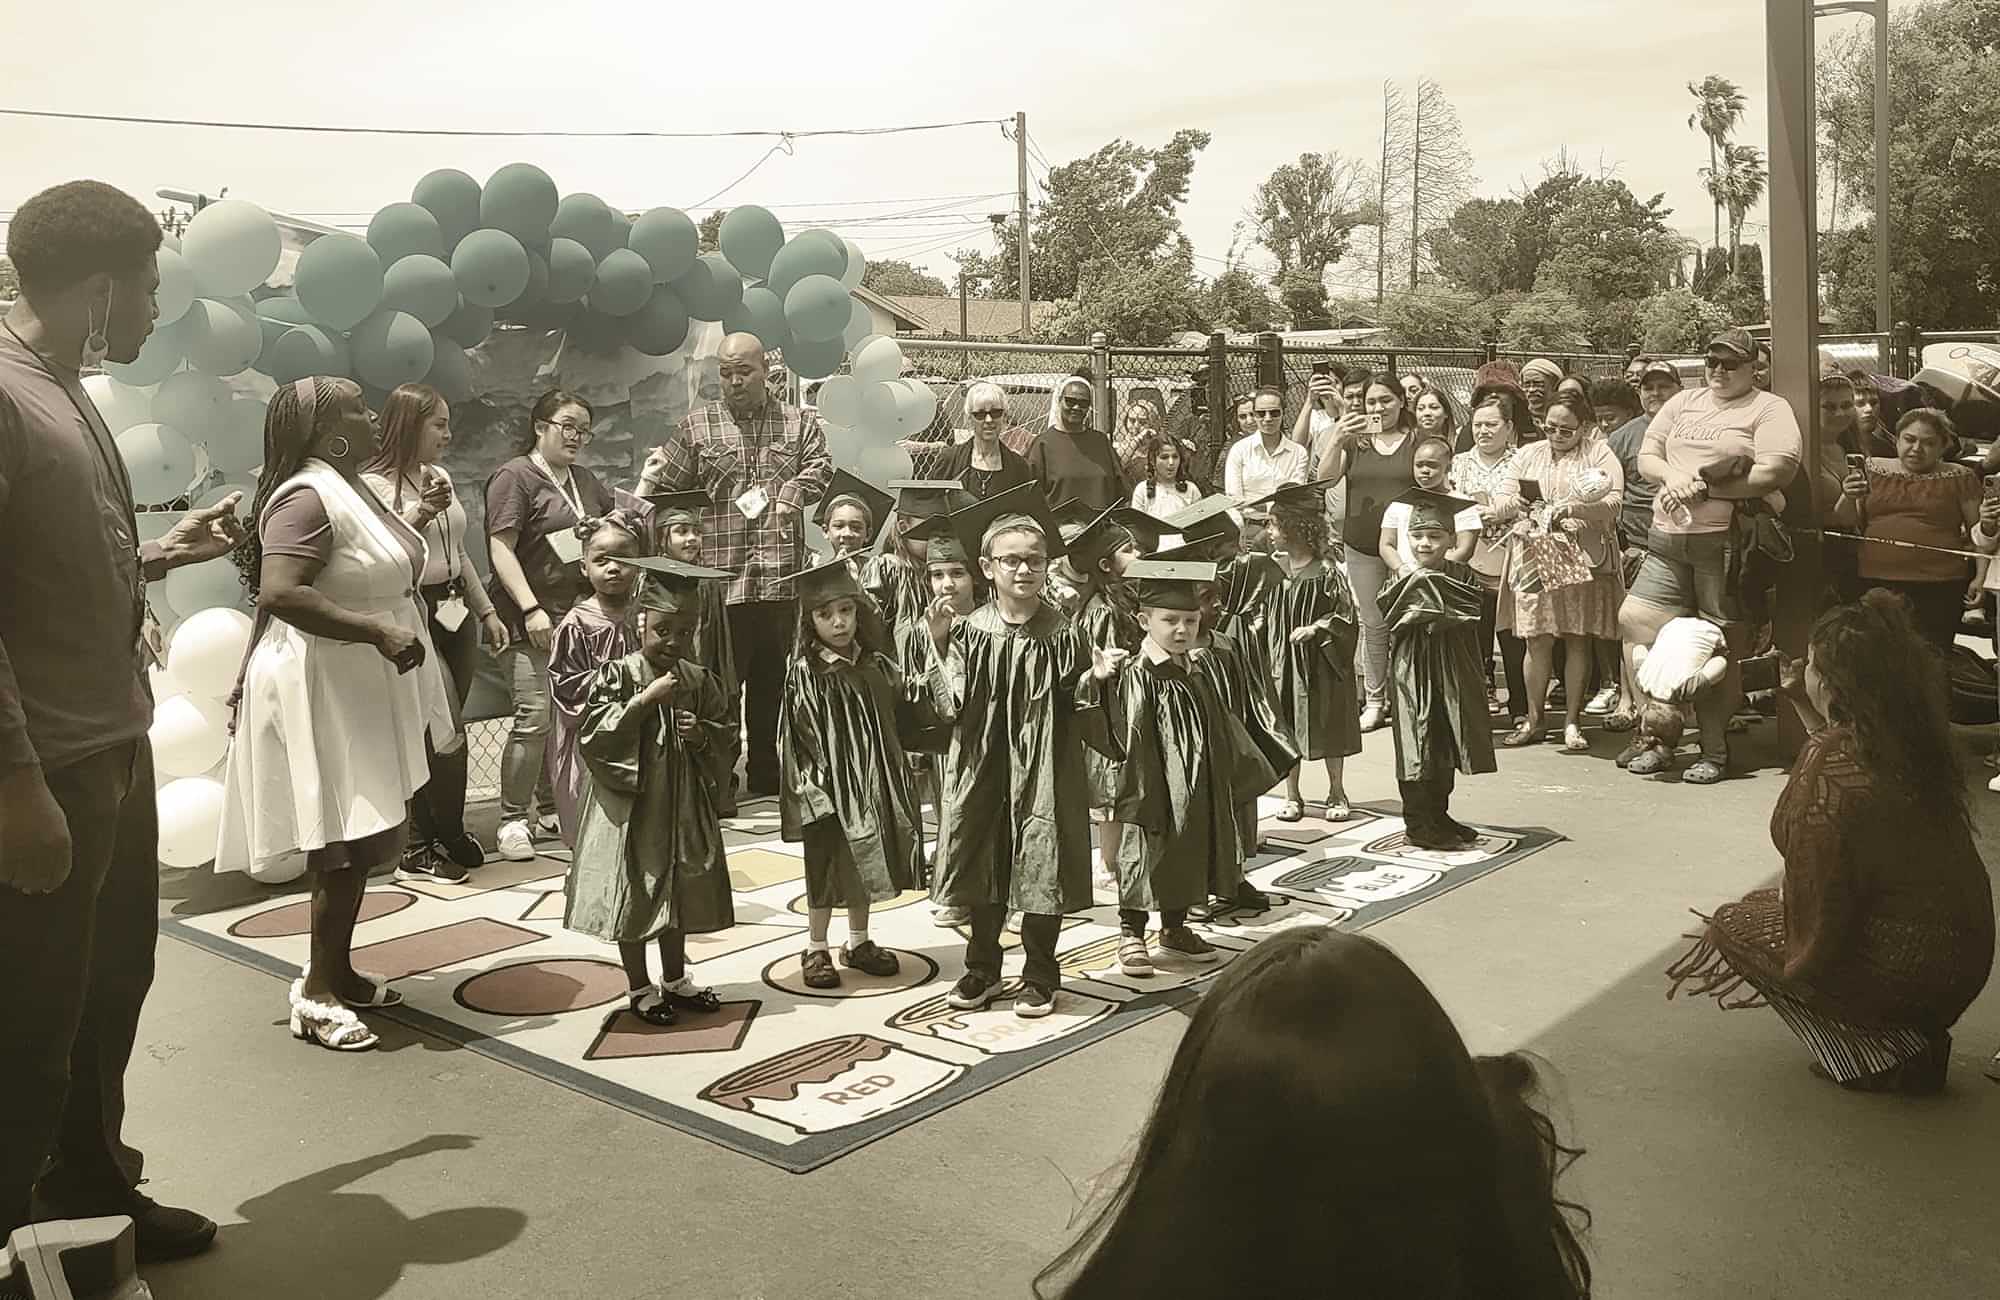 young students of the Mary Bird Early Childhood Education Center dressed in caps and gowns stand on a colorful shape rug in the center of a large crowd of parents, all gathered for a mini matriculation event